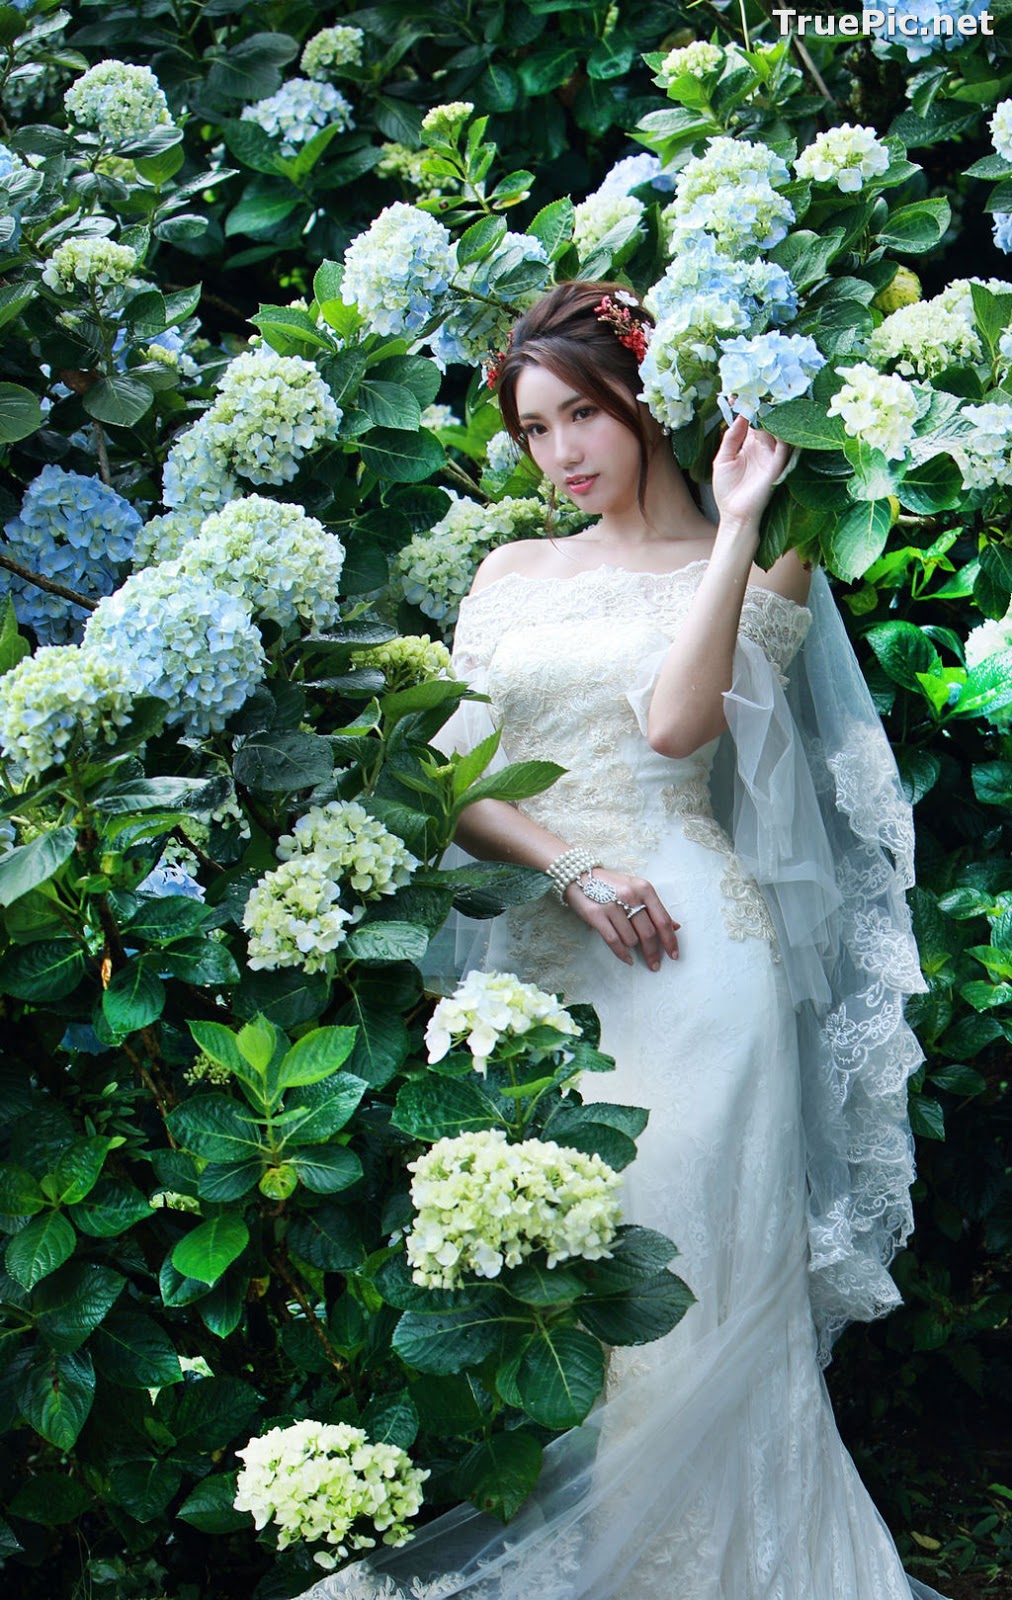 Image Taiwanese Model - 張倫甄 - Beautiful Bride and Hydrangea Flowers - TruePic.net - Picture-47